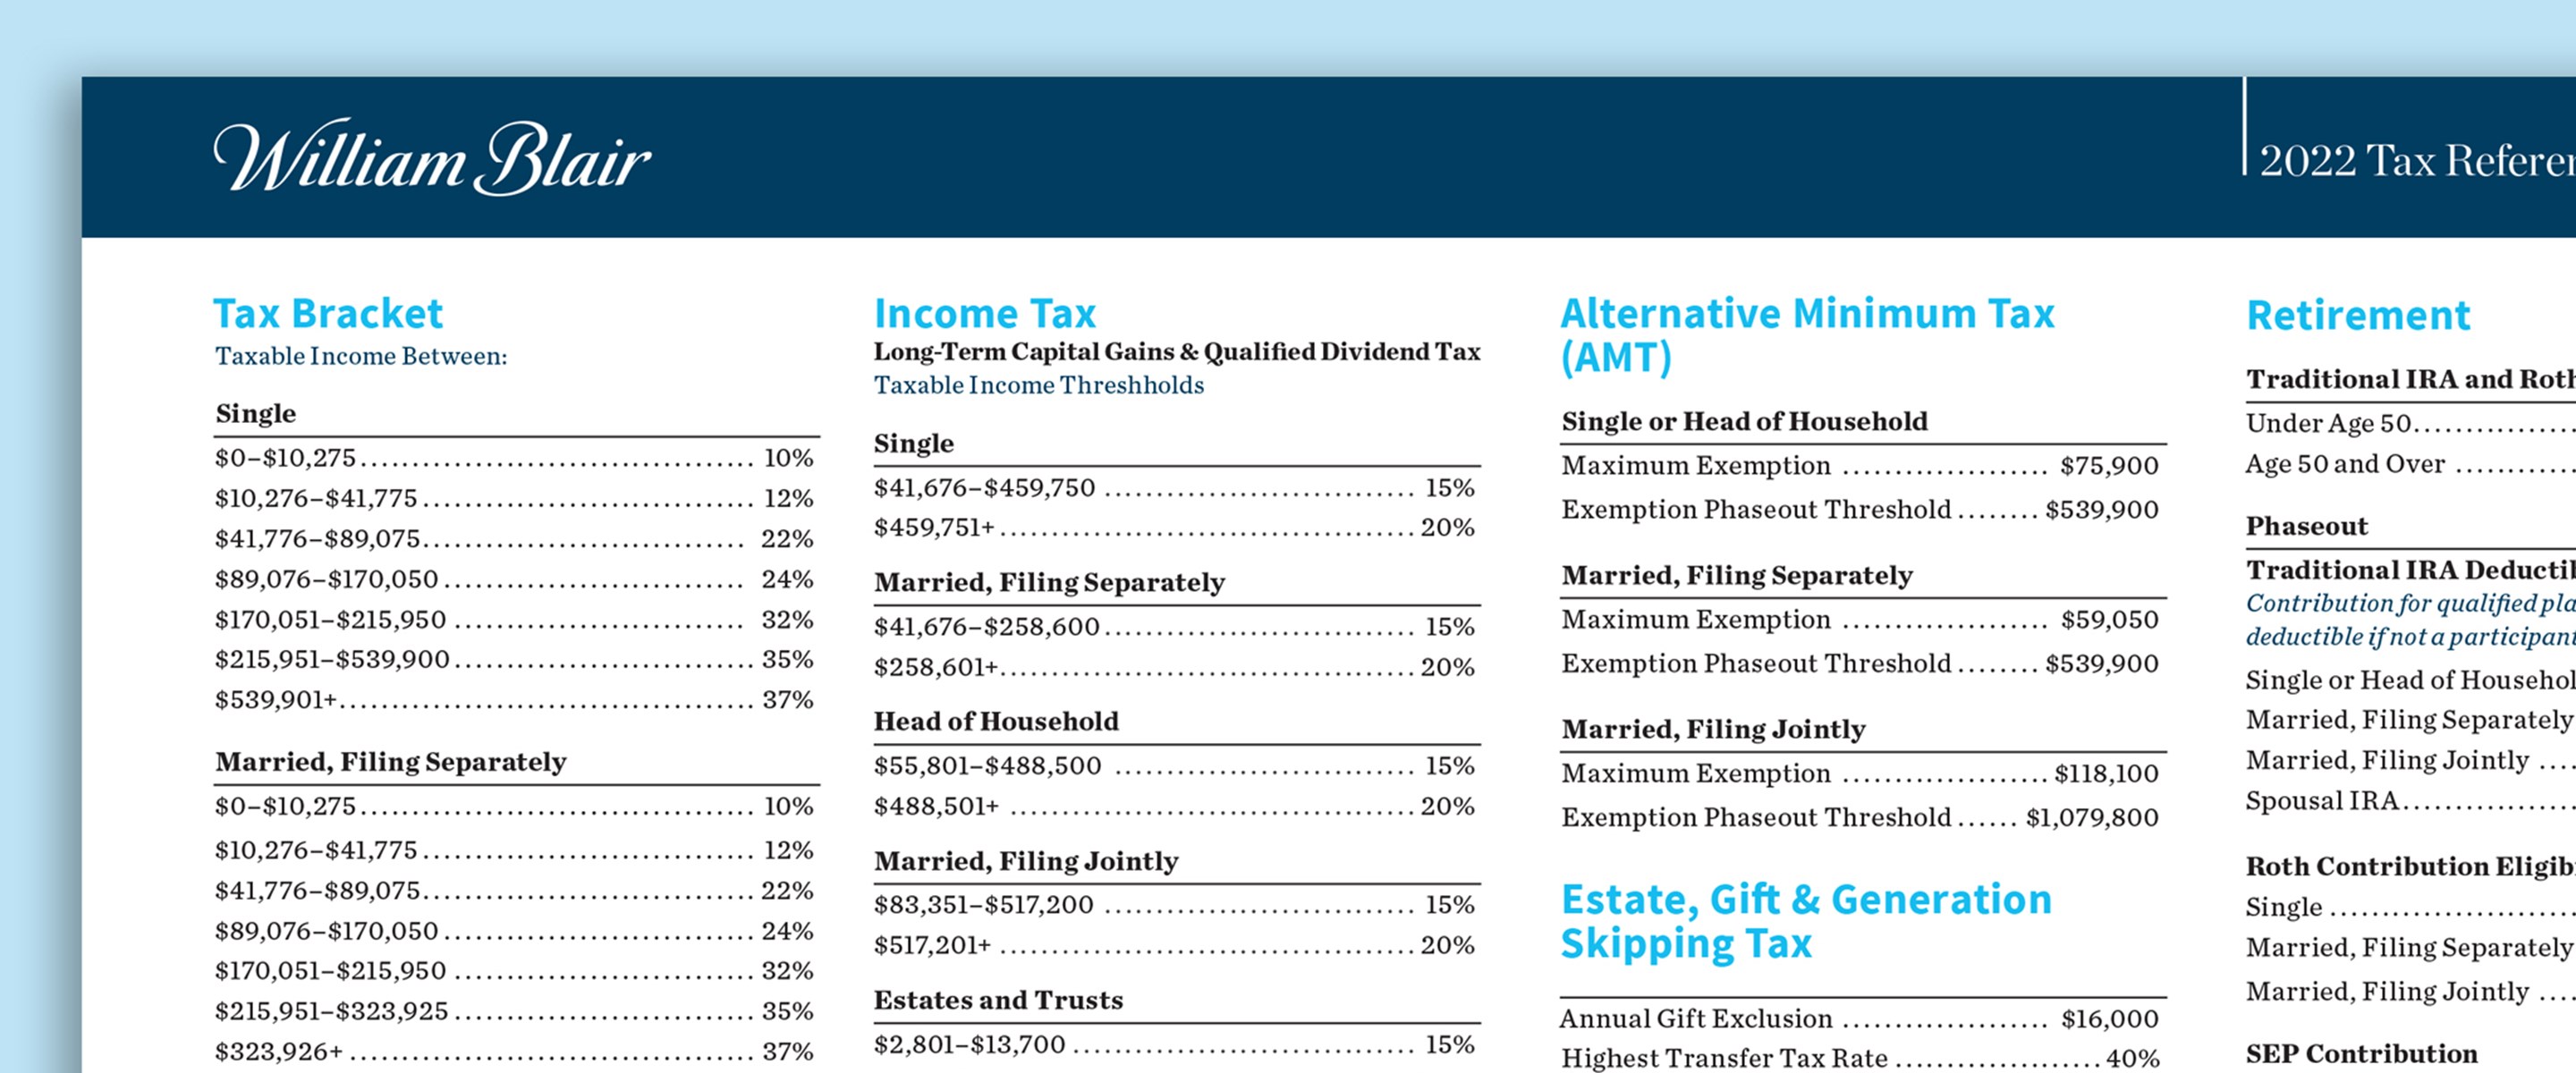 Tax Reference Guide screenshot